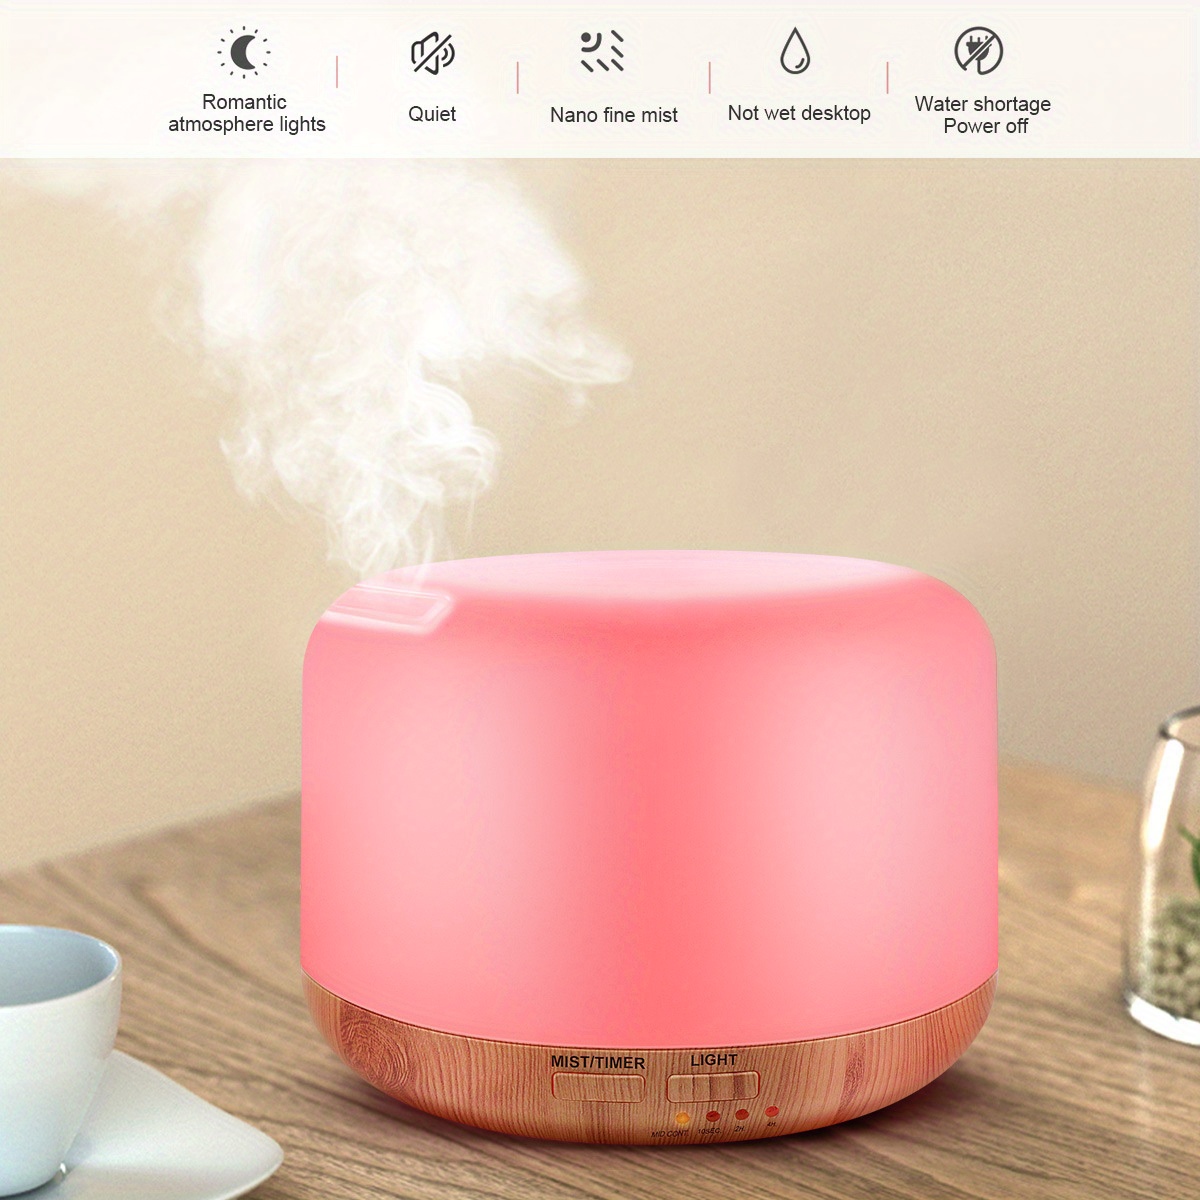 Smart Home Appliances App Touch Controlled WiFi Aroma Room Humidifier Alexa Chrome Air Diffuser 16 91oz With Mobile Control details 6